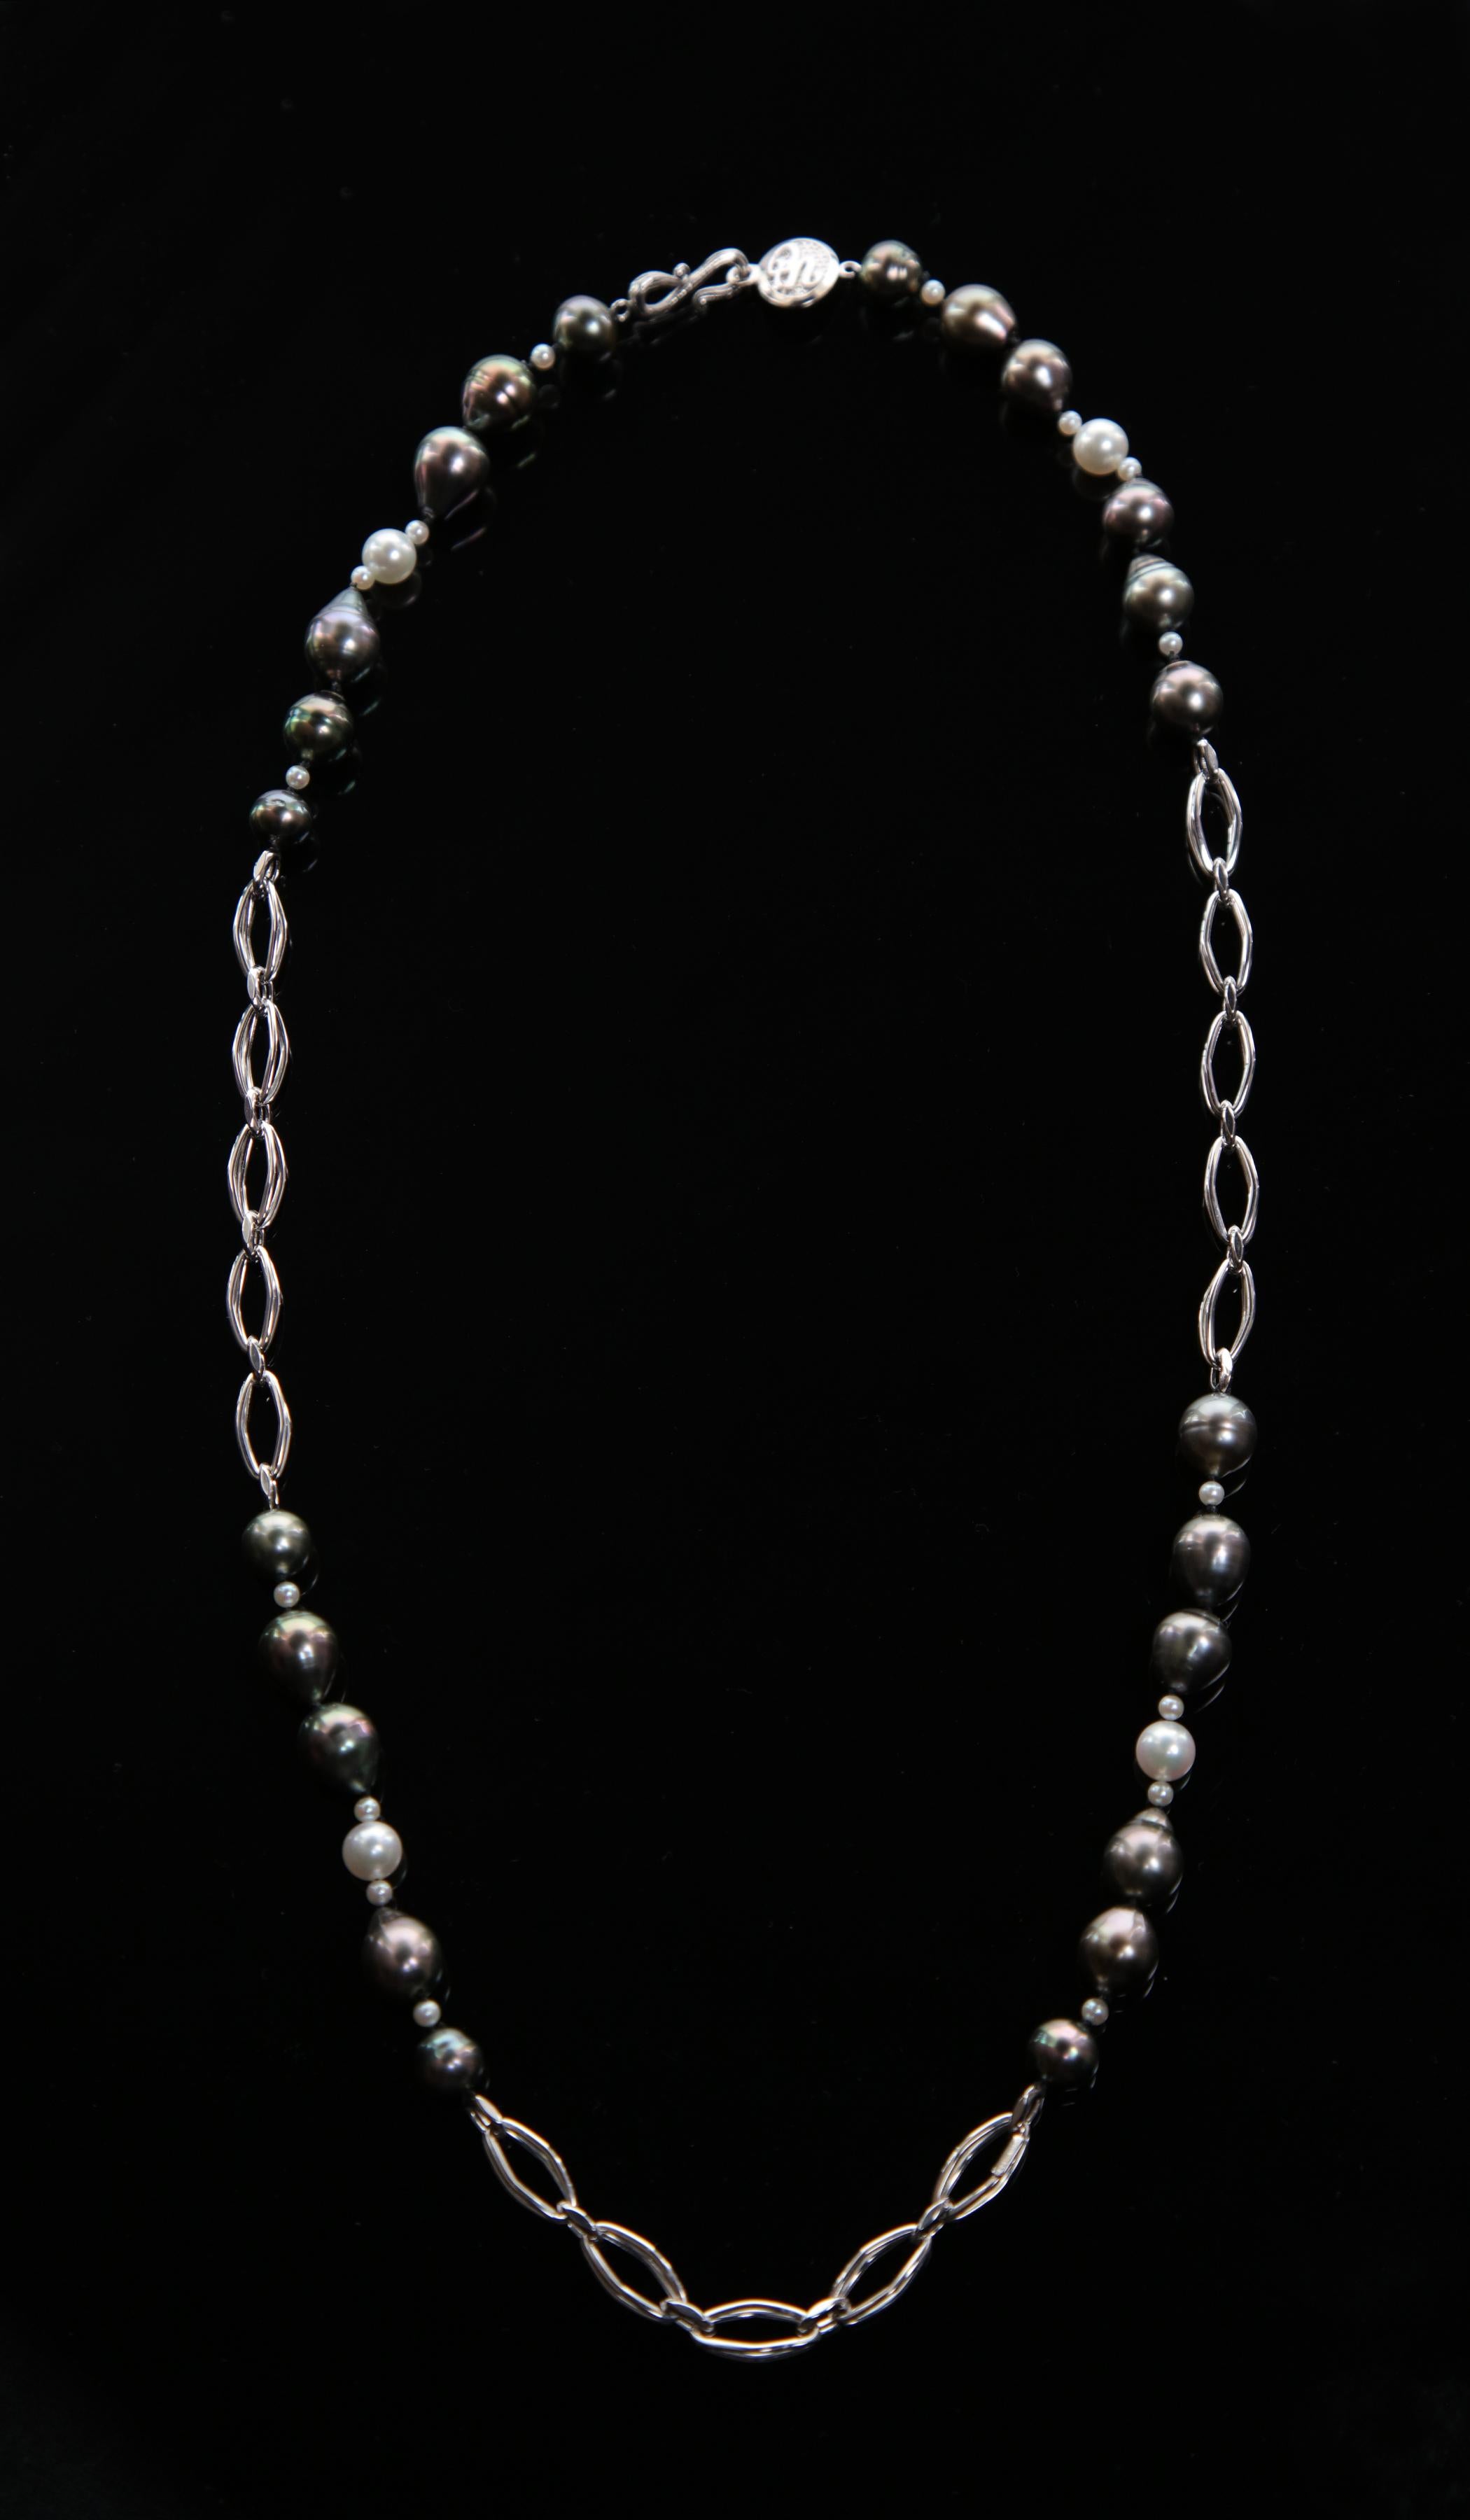 Black tie events are fun, and you are ready when your permanent collection includes a Tahitian and akoya pearl necklace, especially one combined with a luxurious, white gold chain.  Imagine how easy it is to plan a wardrobe when one of these 